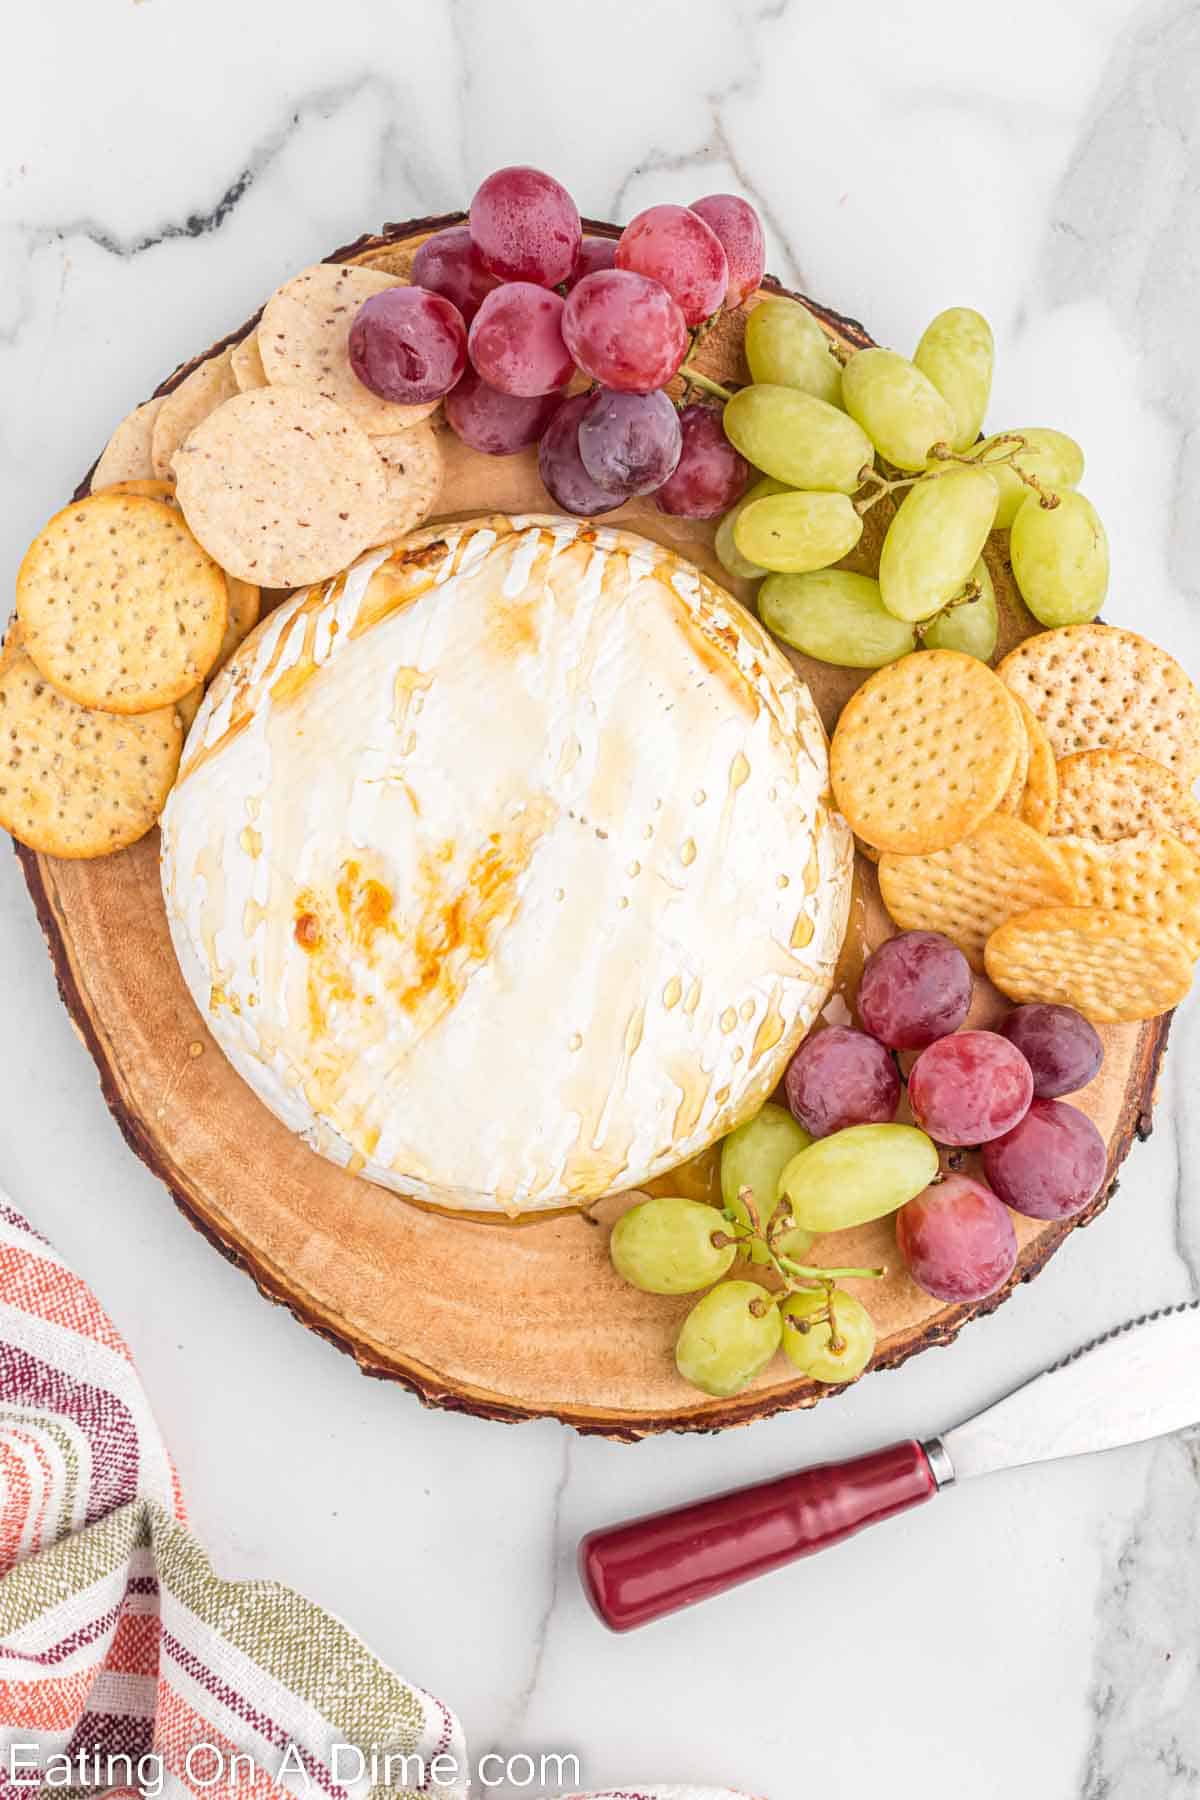 Baked brie on a platter with a side of grapes and crackers